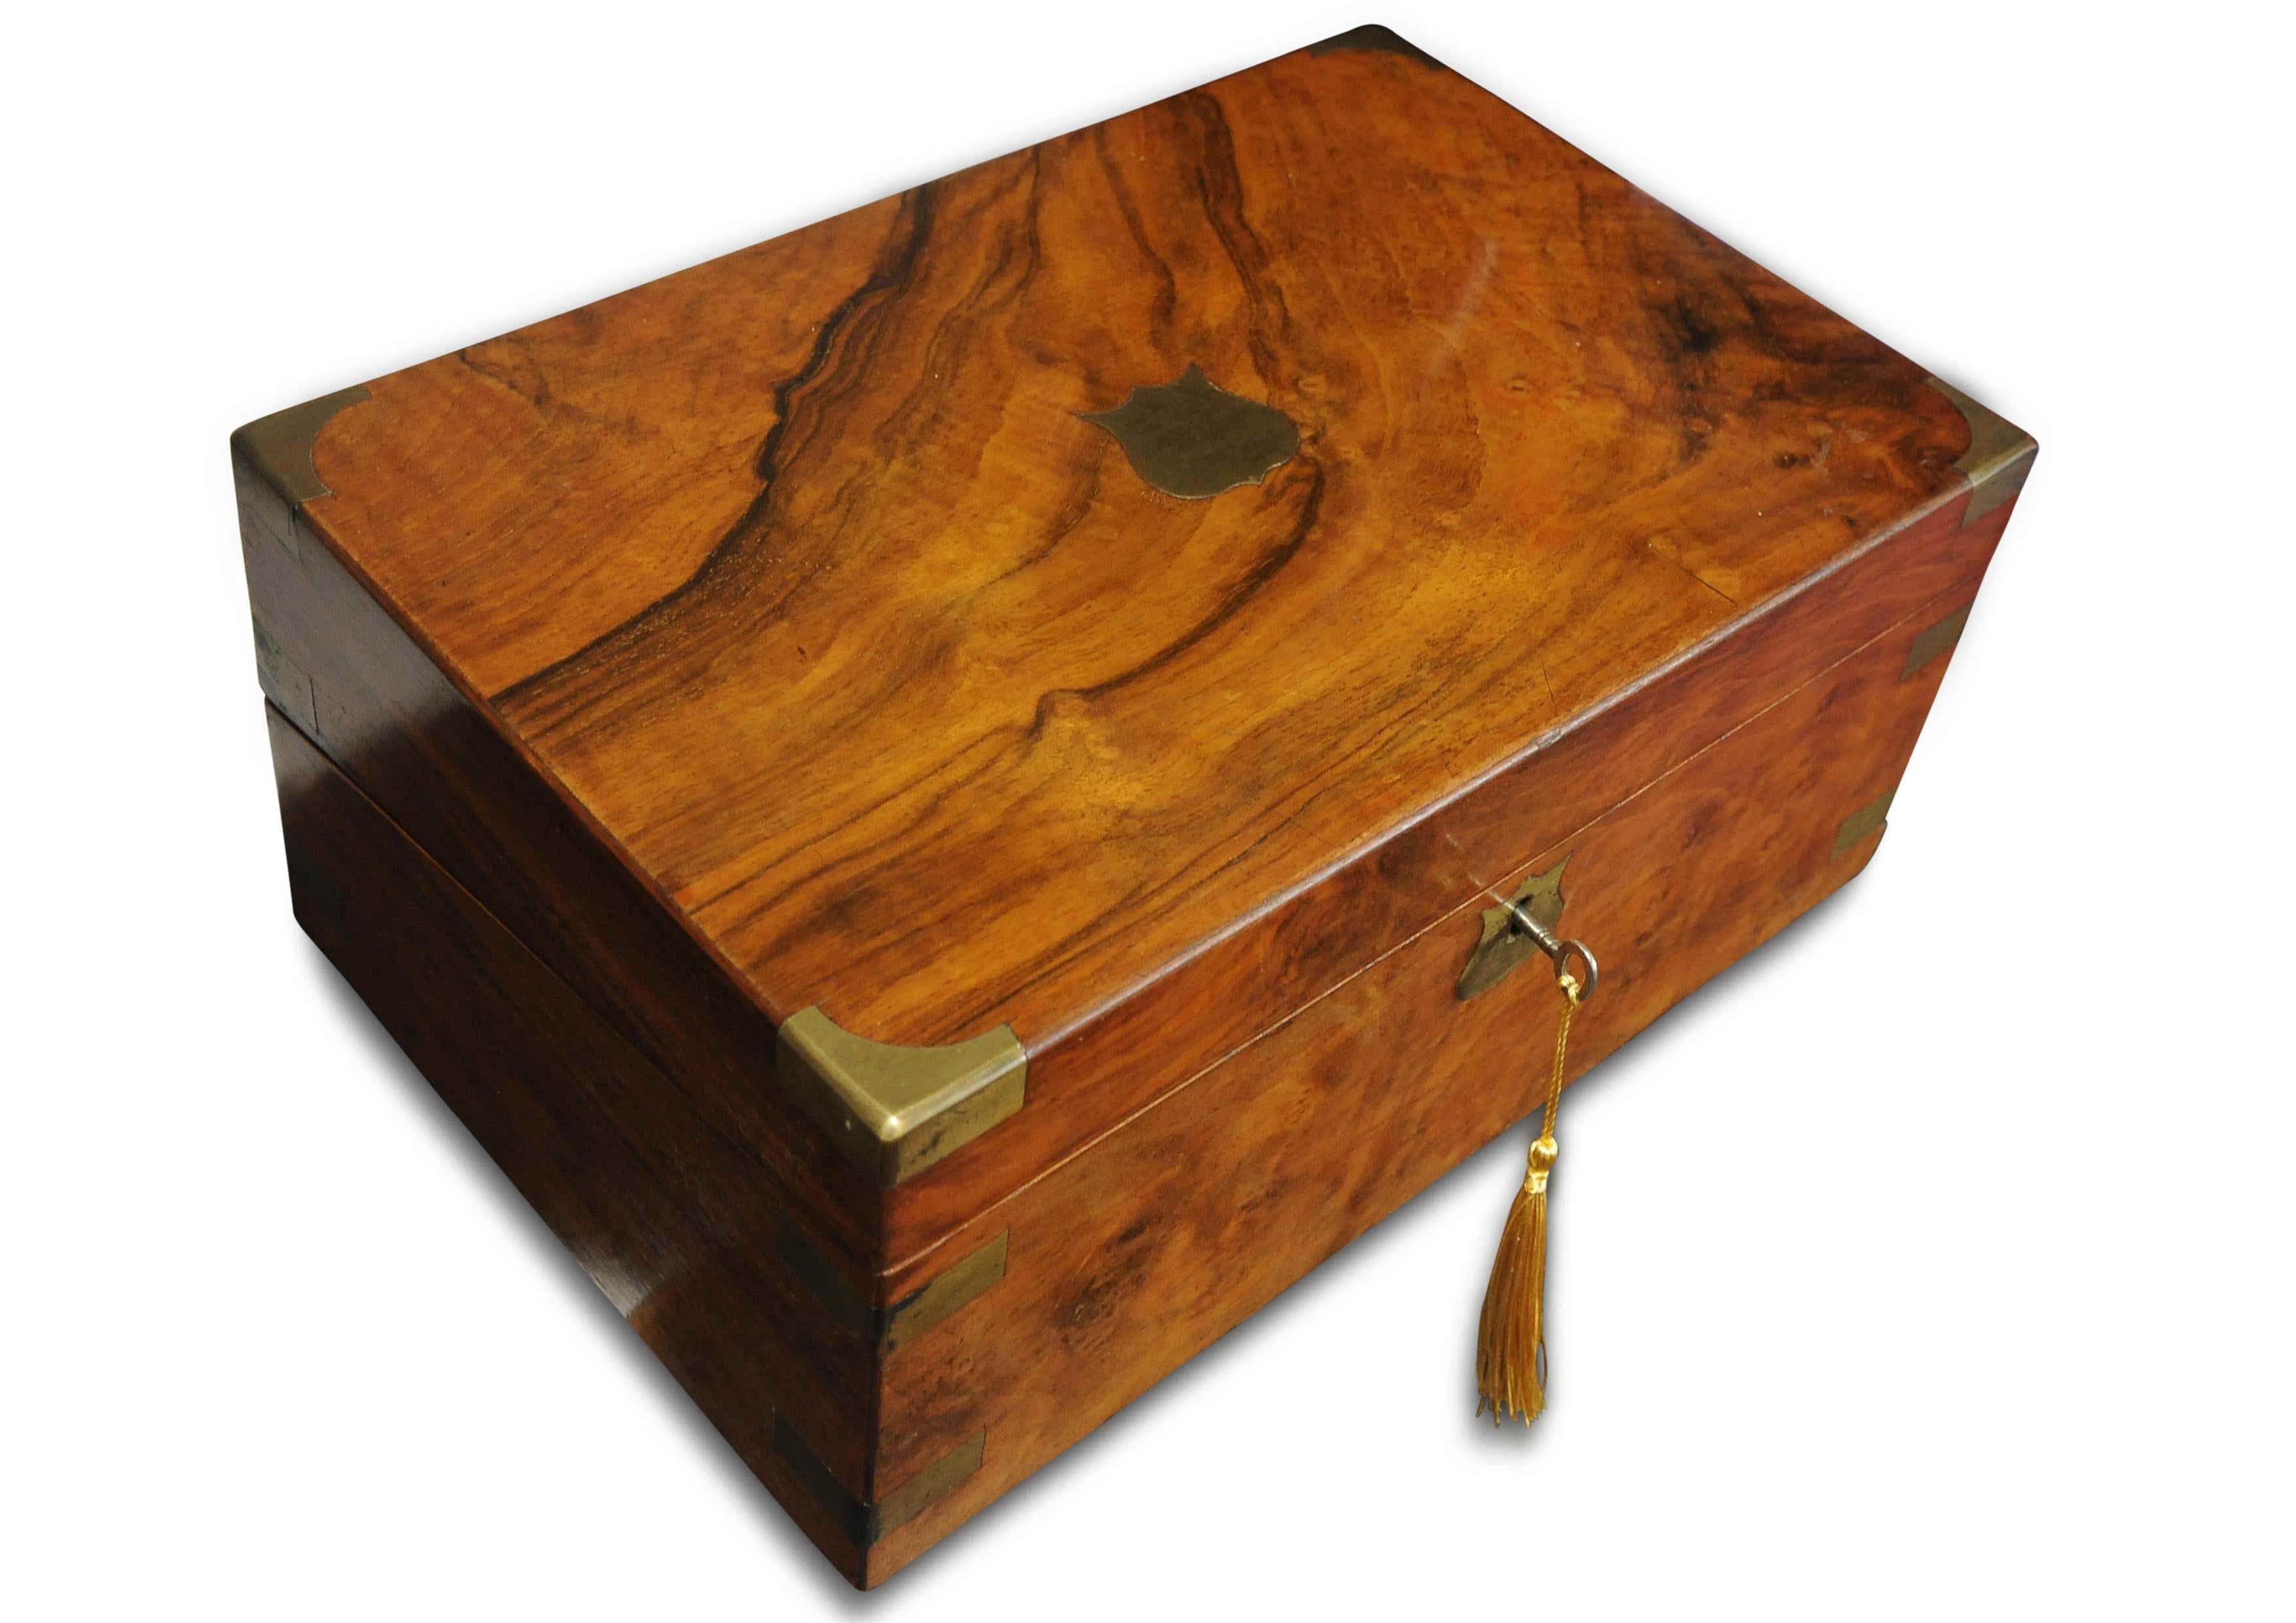 Exquisite Victorian Hand-Crafted Burr Walnut Writing Slope With Black Tooled Leather Interior With Secret Compartment

SLOPE 23

Brass front shield could be personalised with engraving.

The top and front have been decorated in the military campaign